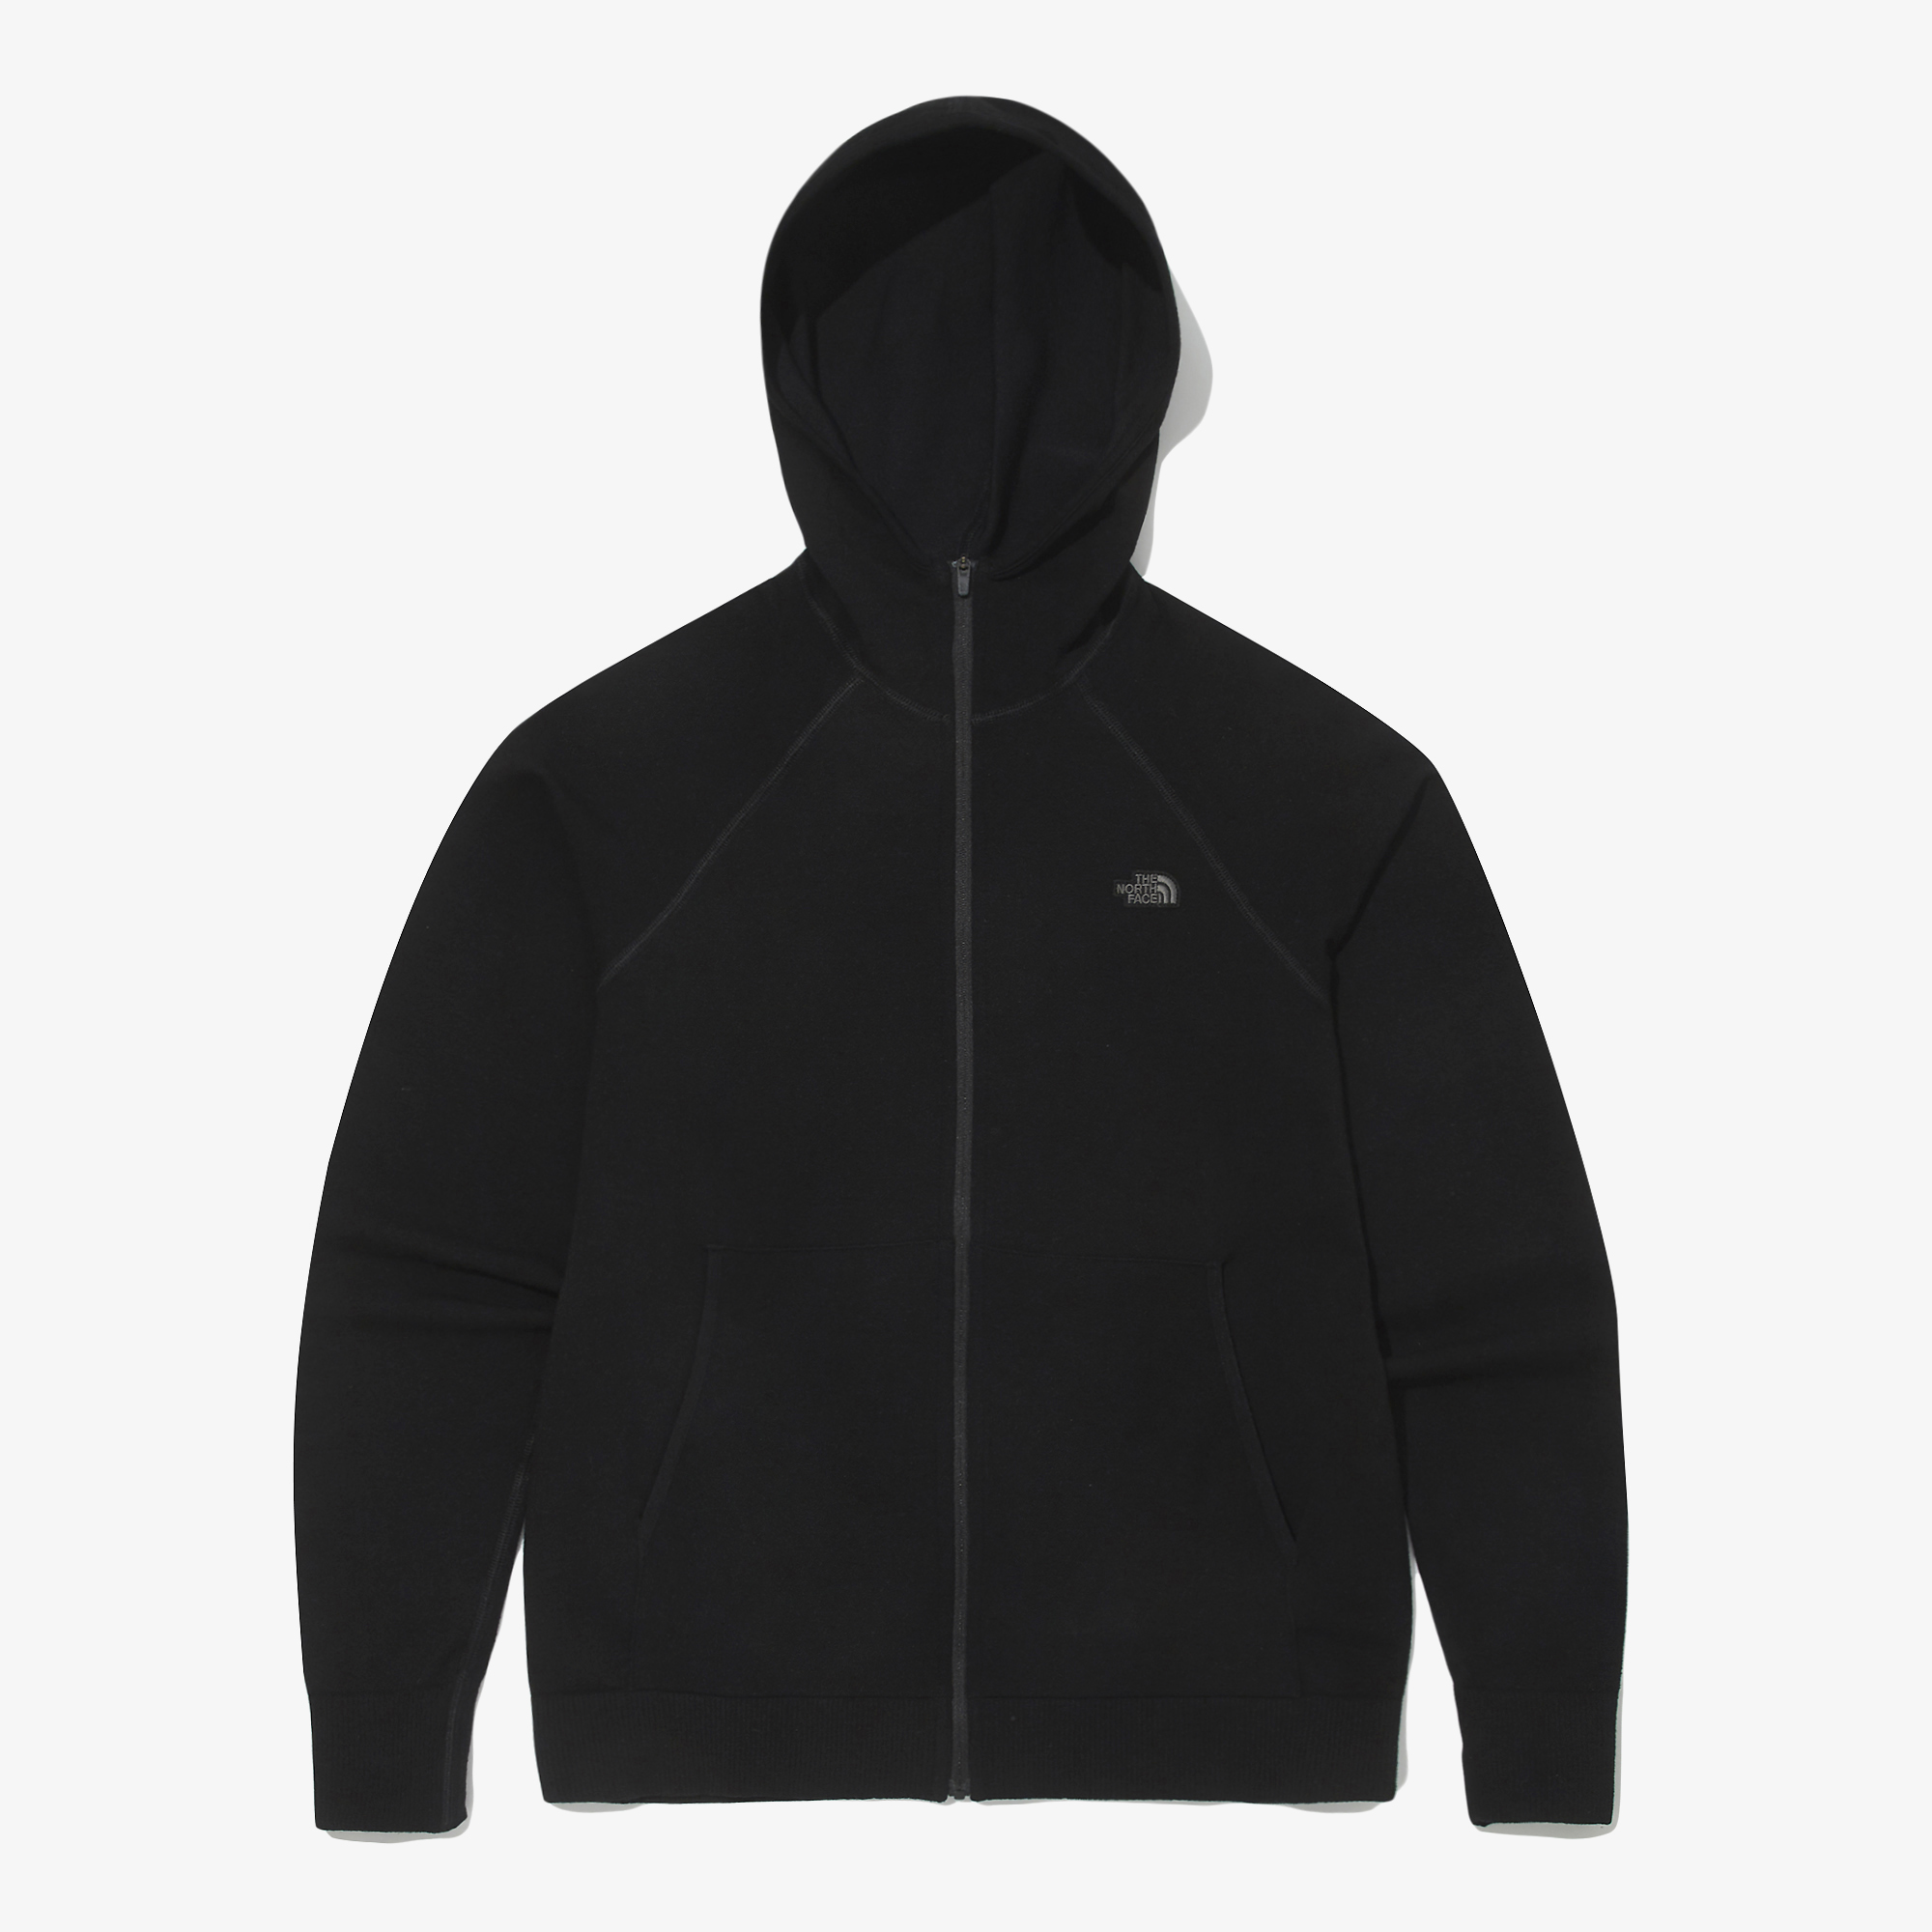 THE NORTH FACE-W’S SEAMLESS FULL ZIP JACKET